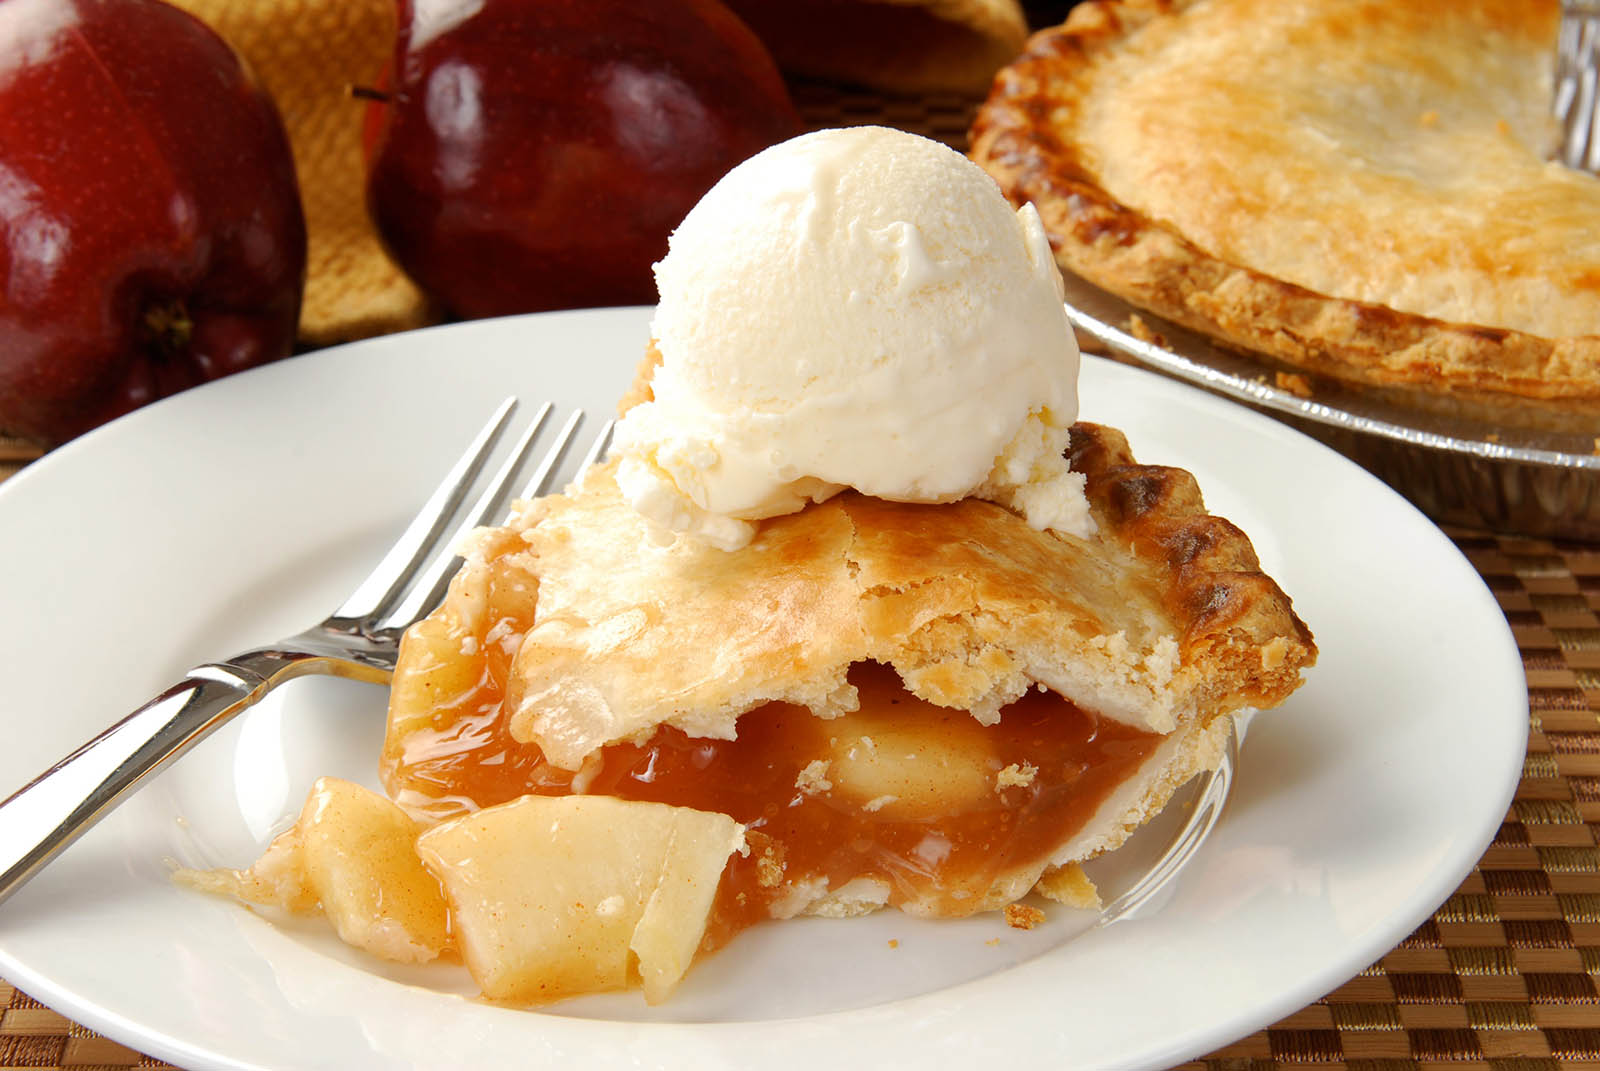 This Overrated/Underrated Food Quiz Will Reveal Your Exact Age Apple pie with vanilla ice cream